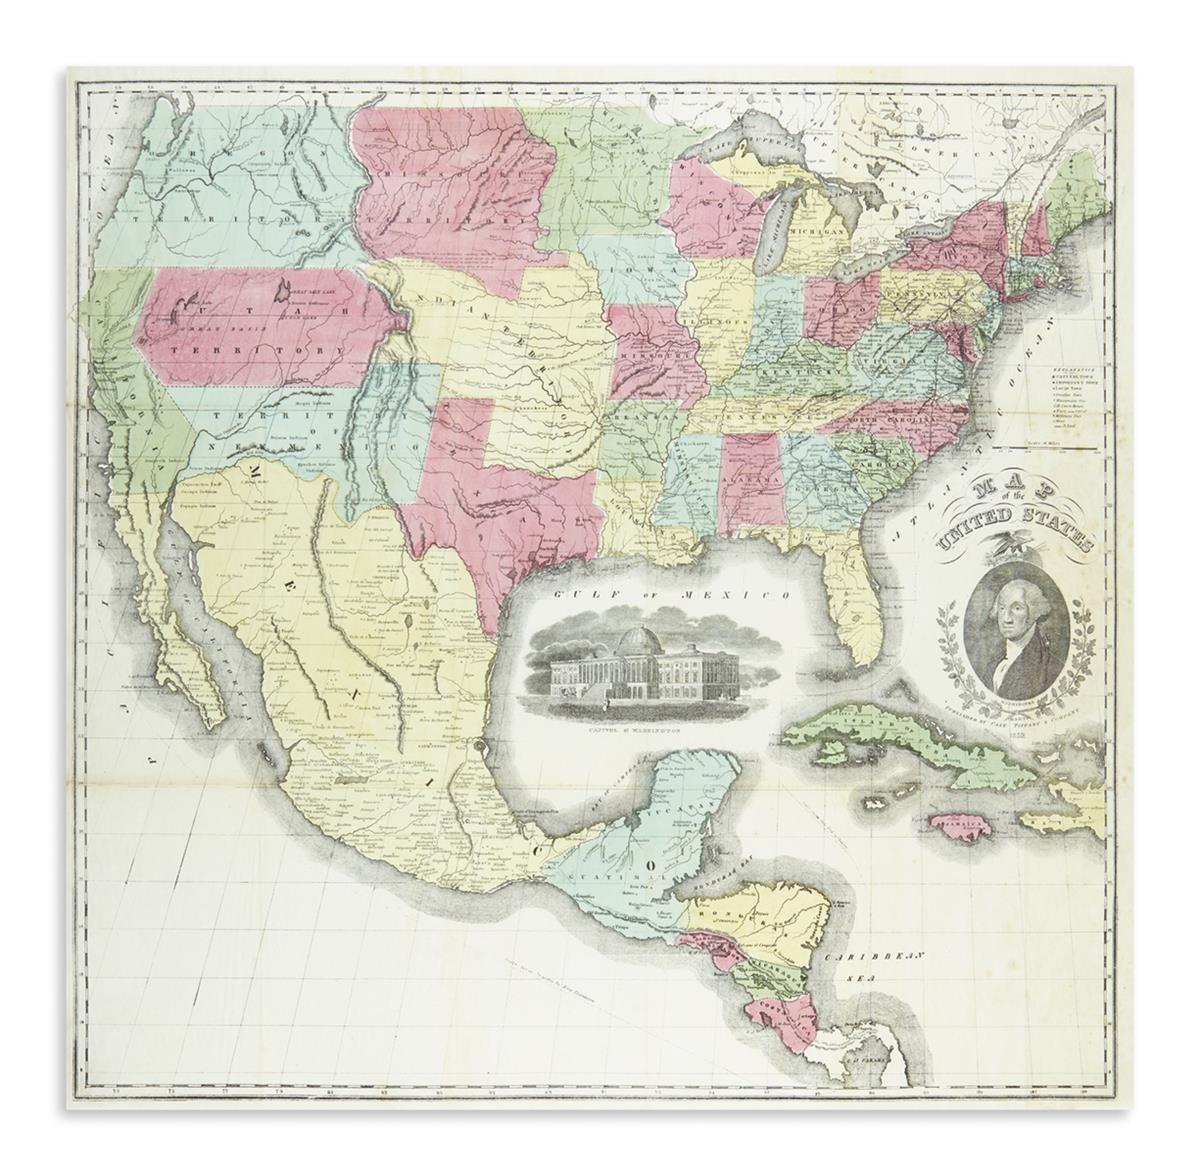 CASE, TIFFANY & COMPANY. Map of the United States.